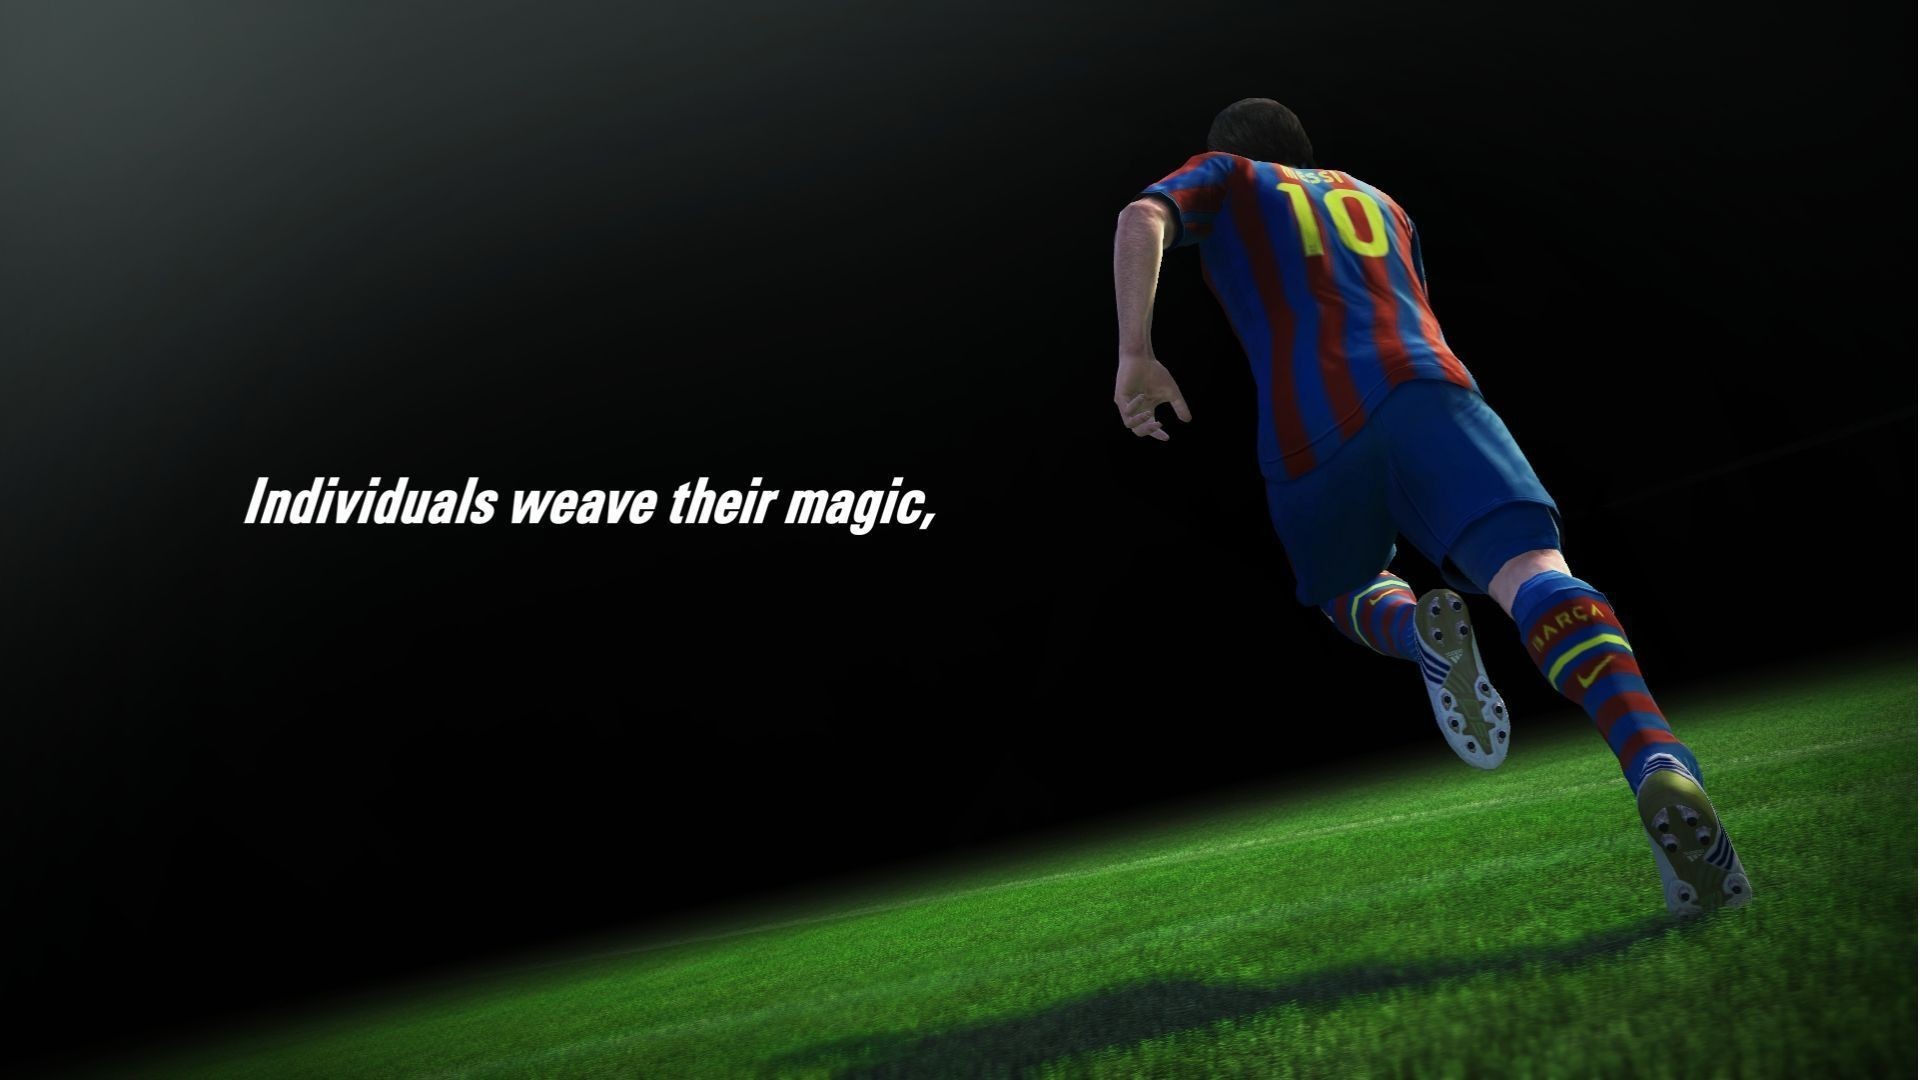 1920x1080 Football Wallpapers Cool Football Wallpapers Cool Football ... Teams Soccer  Wallpaper Backgrounds ...